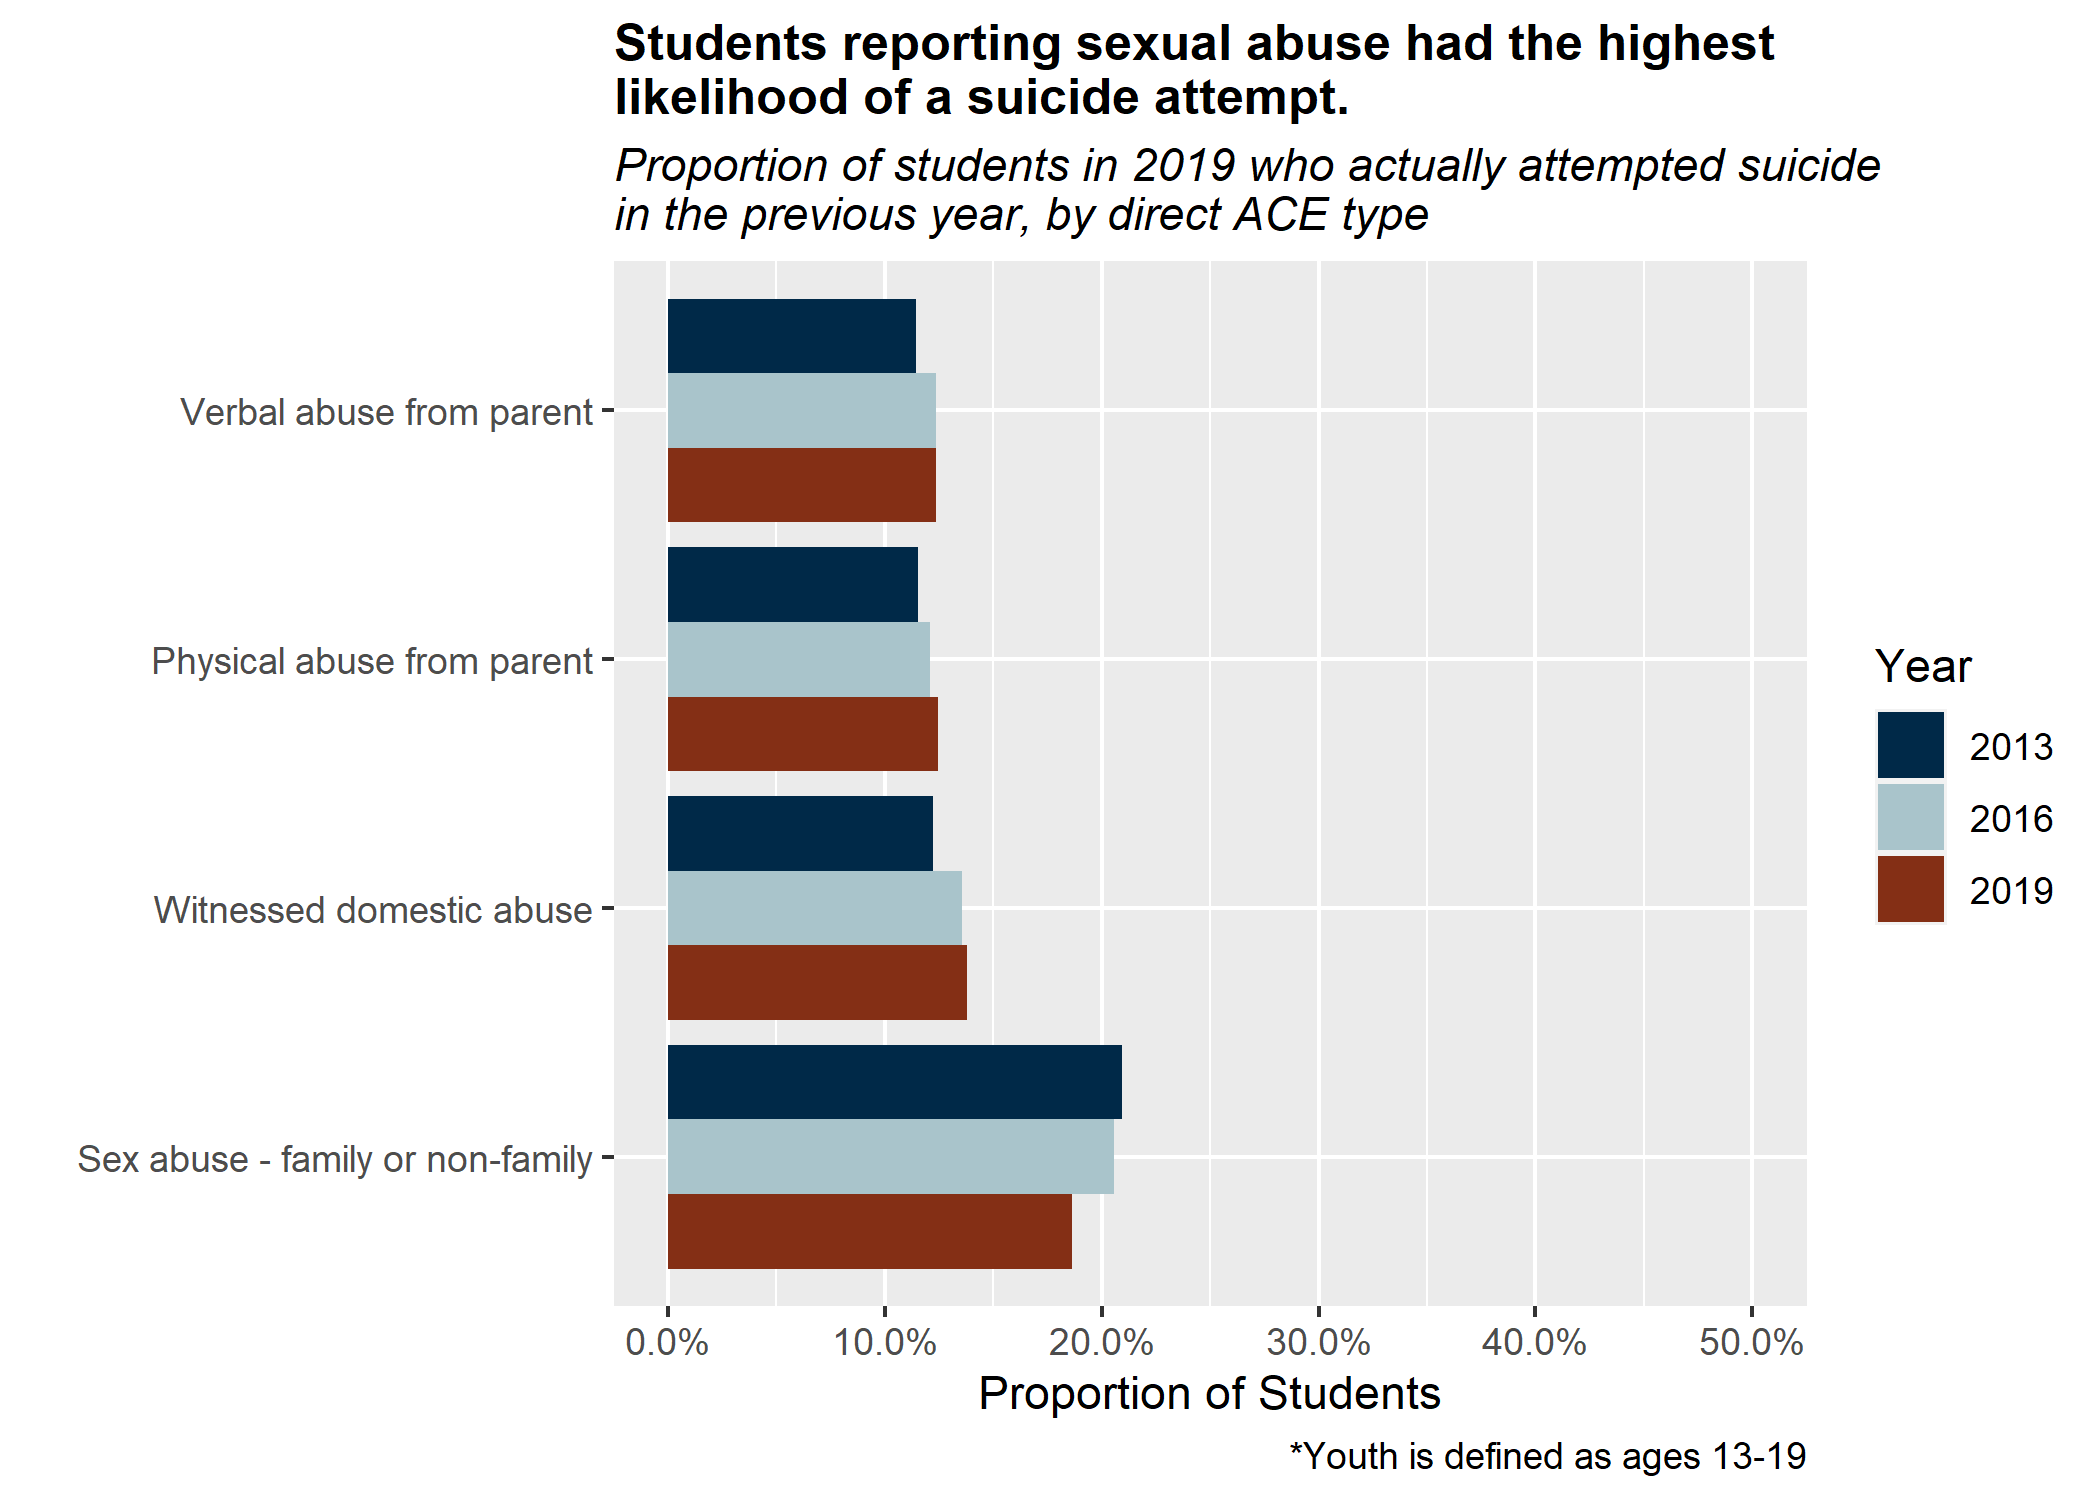 Students reporting sexual abuse had the highest liklihood of suicide attempt